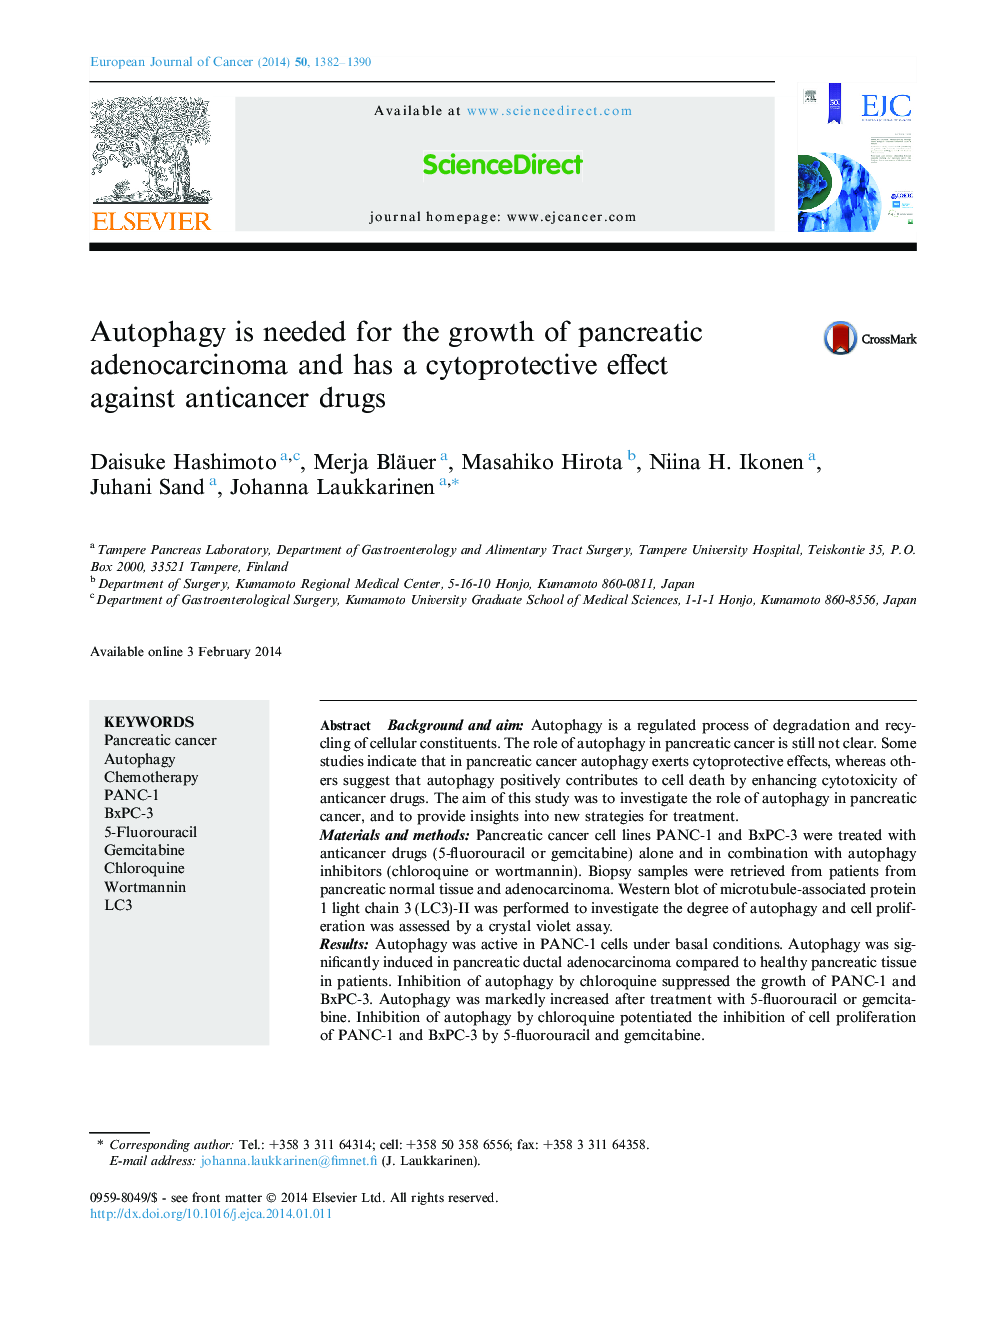 Autophagy is needed for the growth of pancreatic adenocarcinoma and has a cytoprotective effect against anticancer drugs